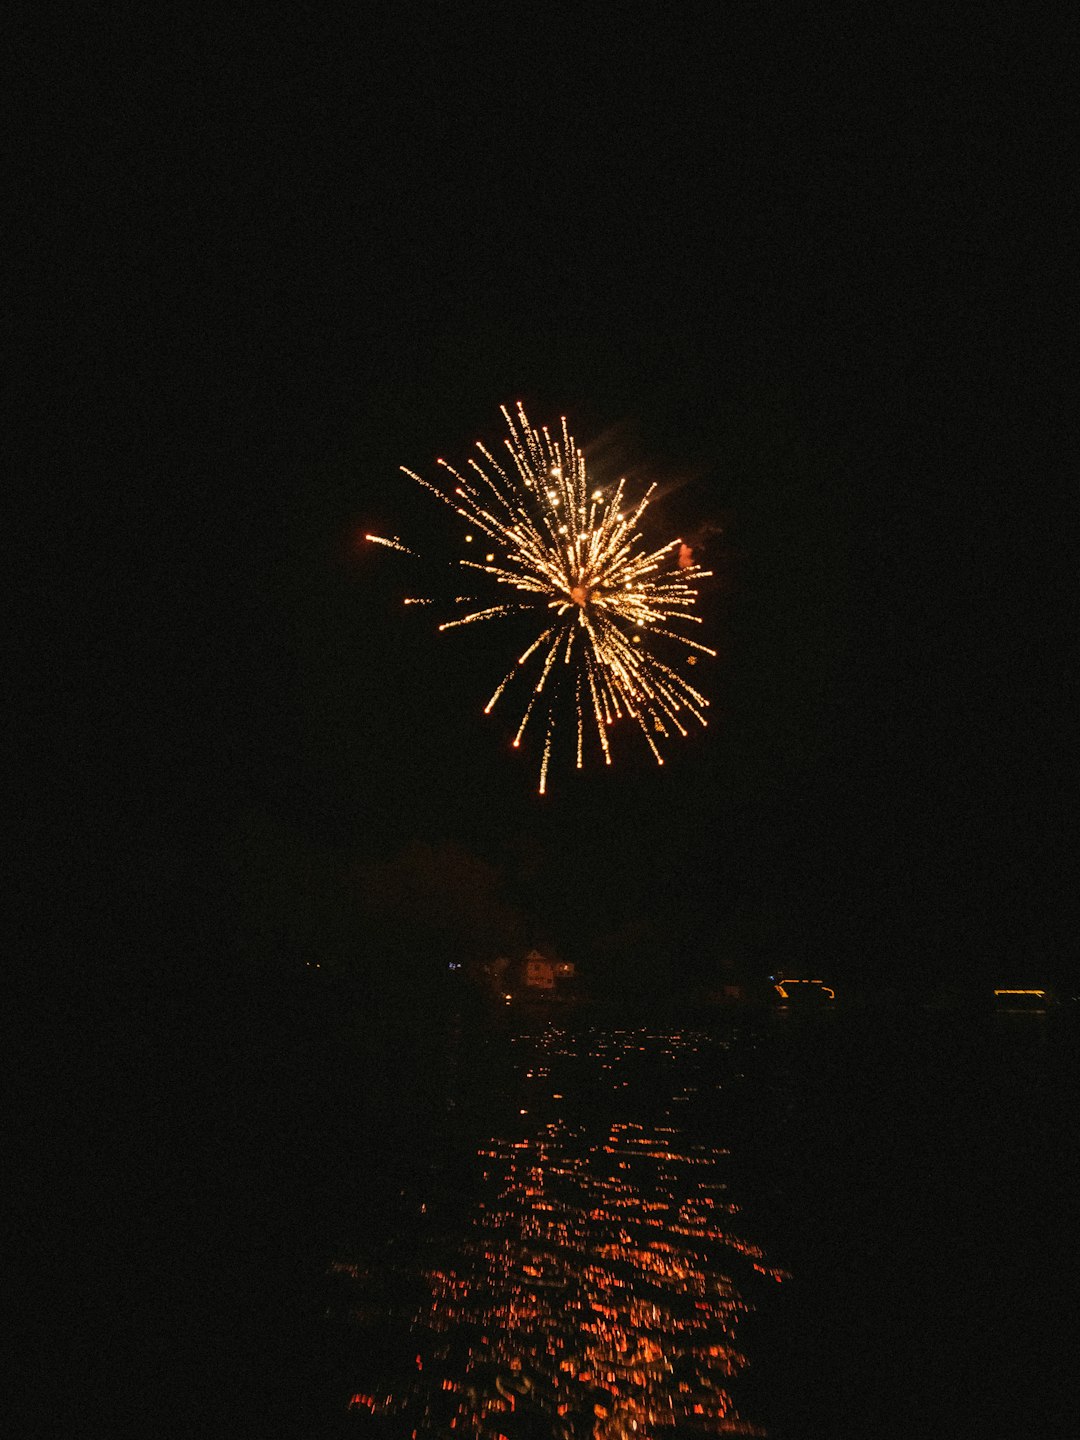 fireworks display over body of water during night time